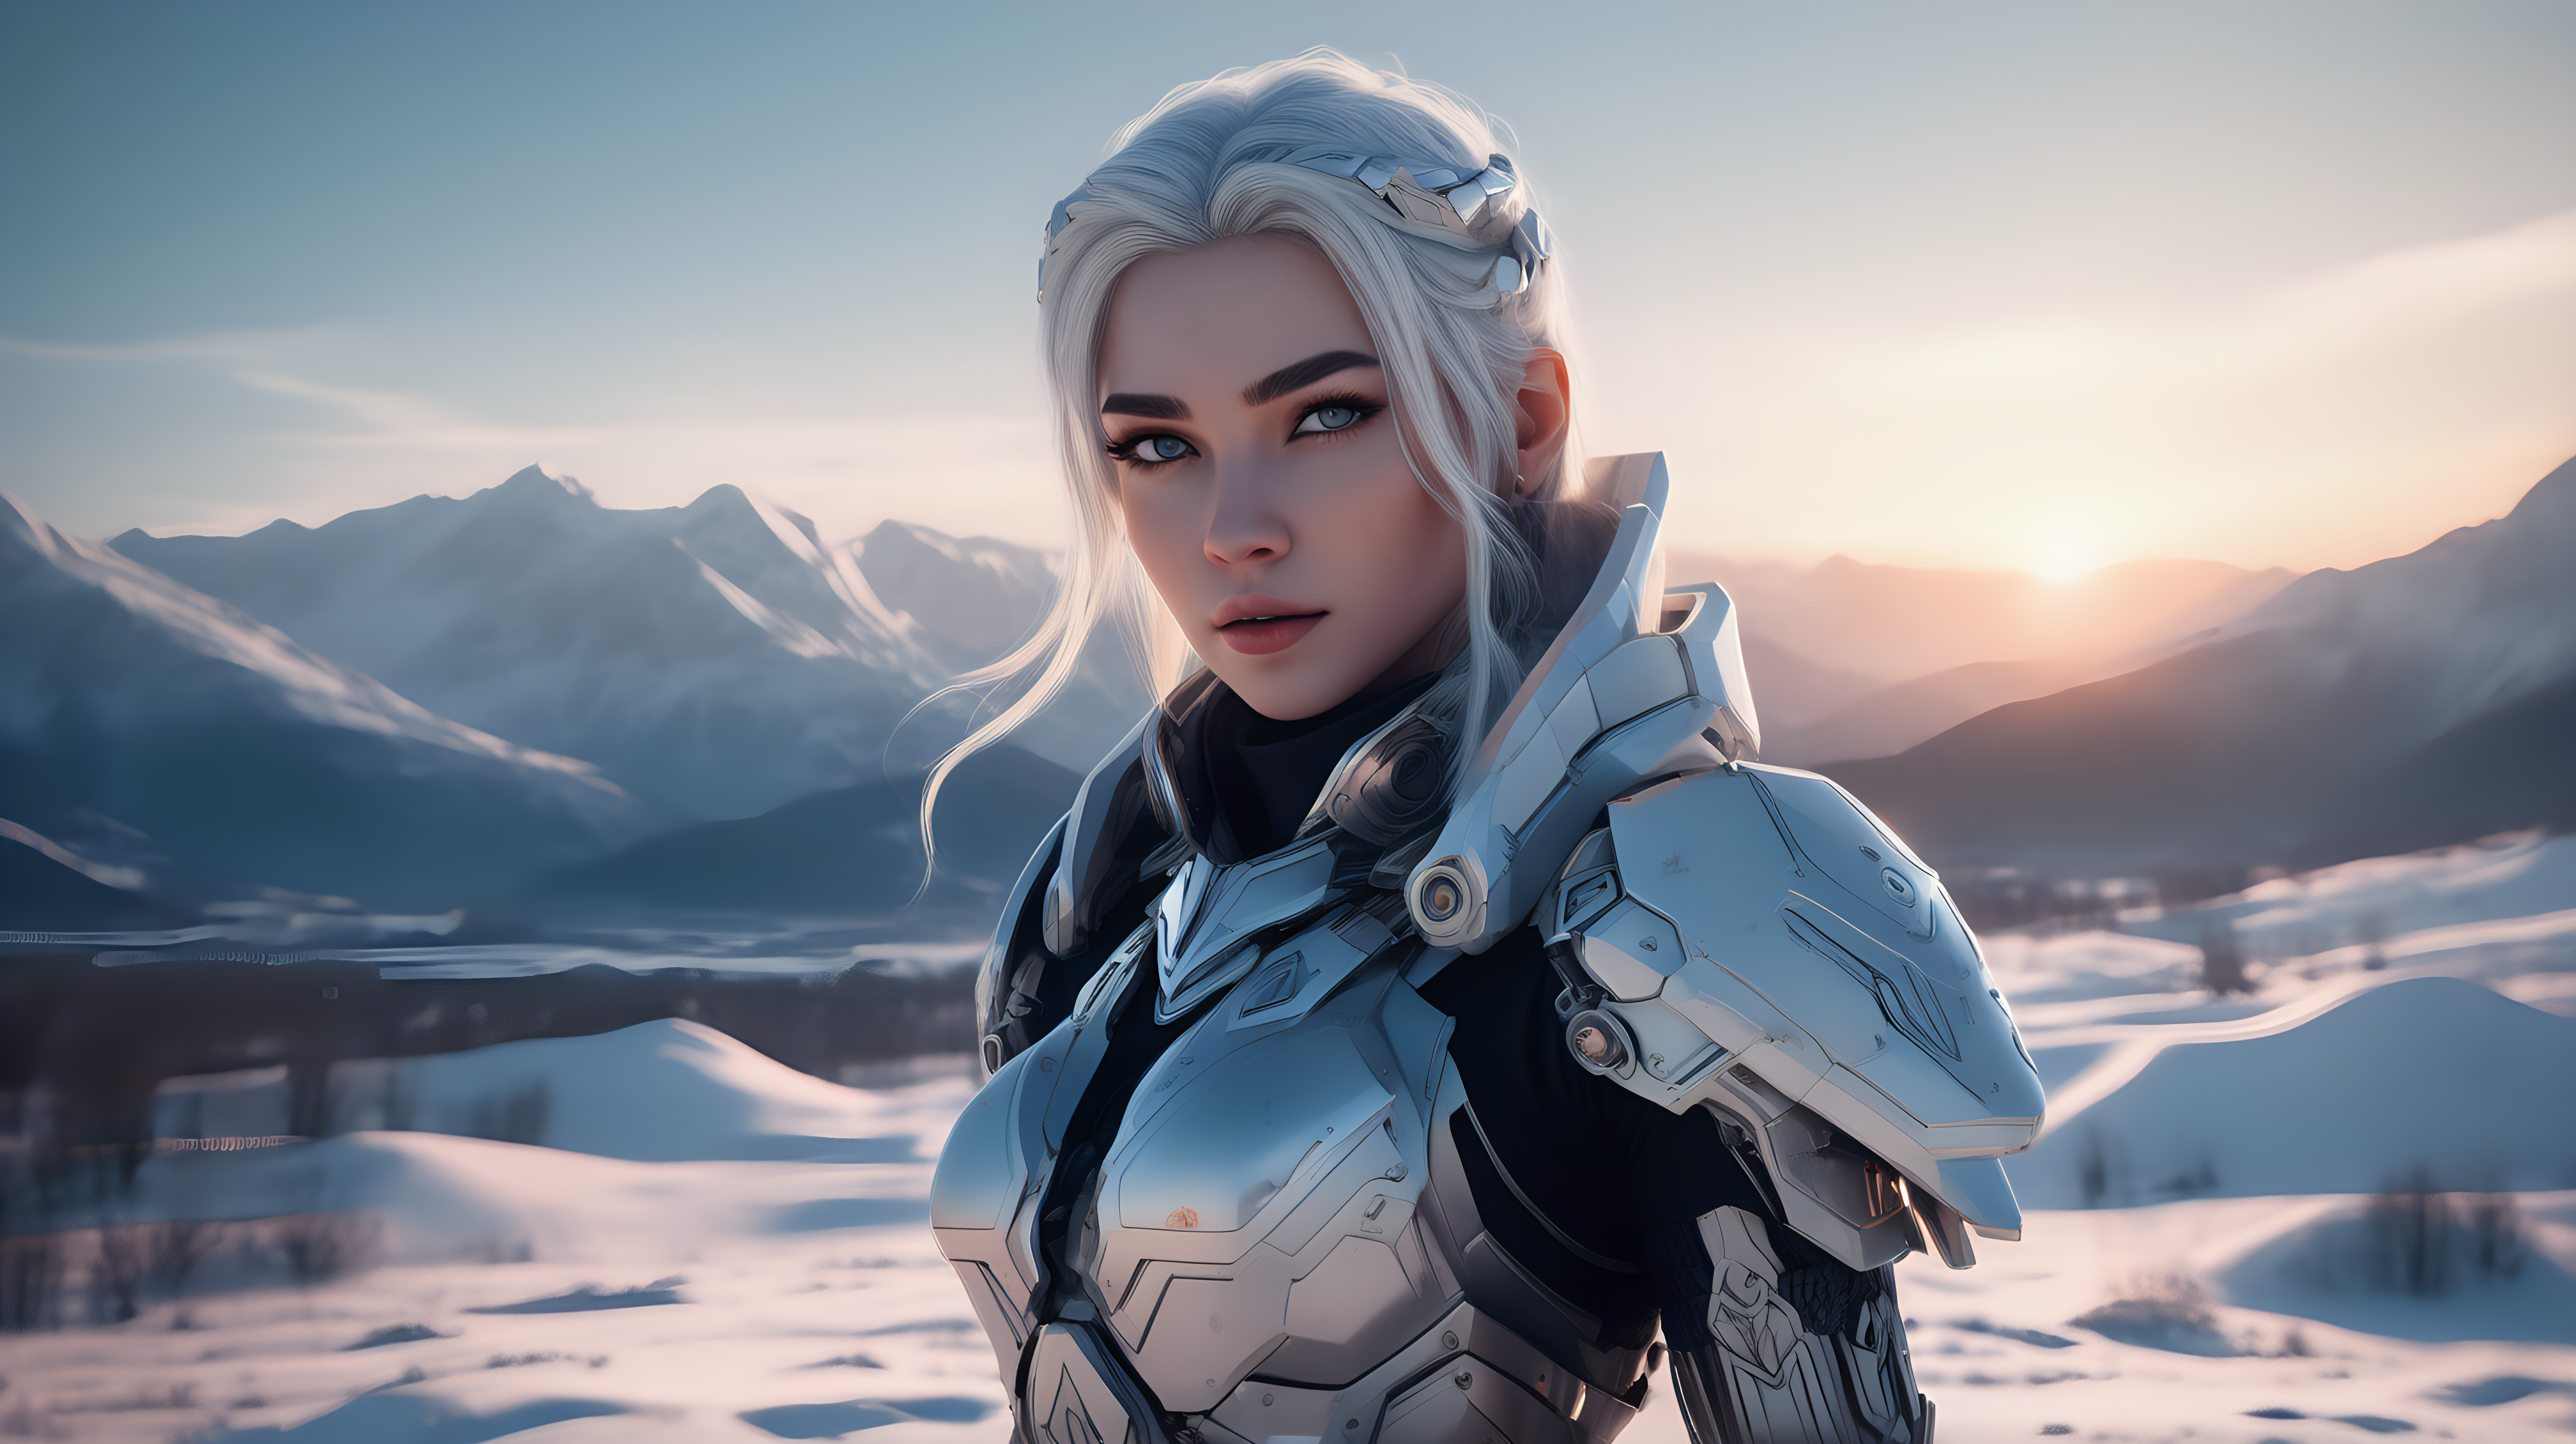 the photo is taken in snowy landscape with mountains in the distance sunset. a cyborg cute valkirie looking camera. Sharp focus. A ultrarealistic perfect example of cinematic shot. Use muted colors to add to the scene.